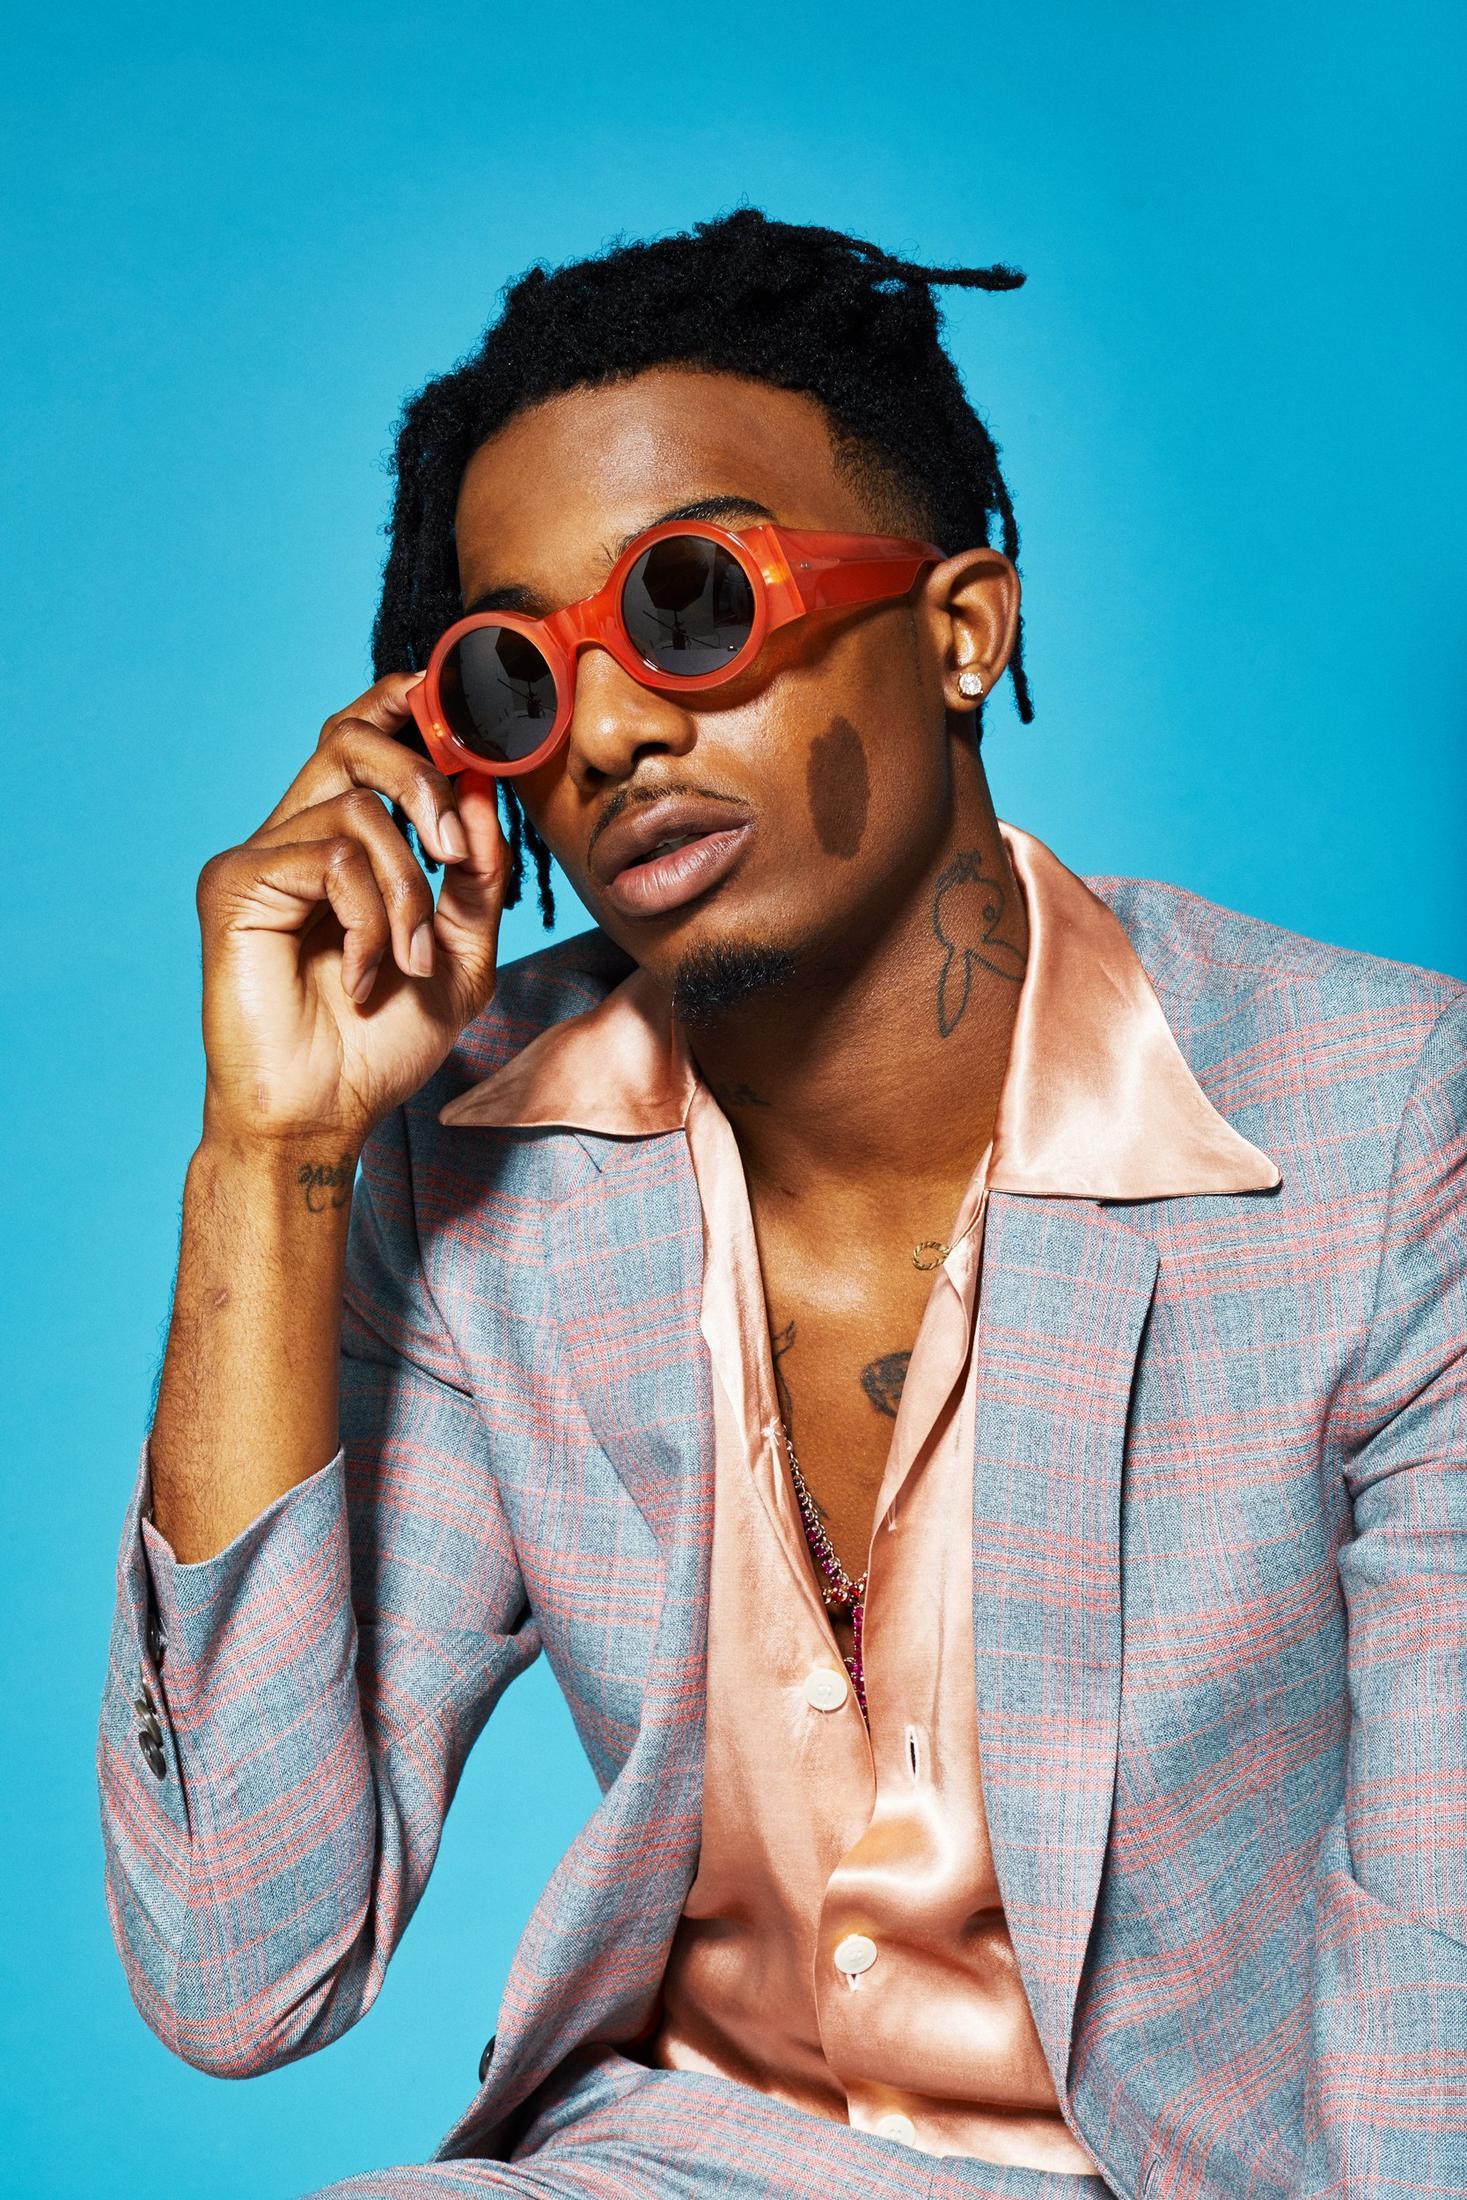 Playboi Carti Is Here to Own Your Summer Playlist.